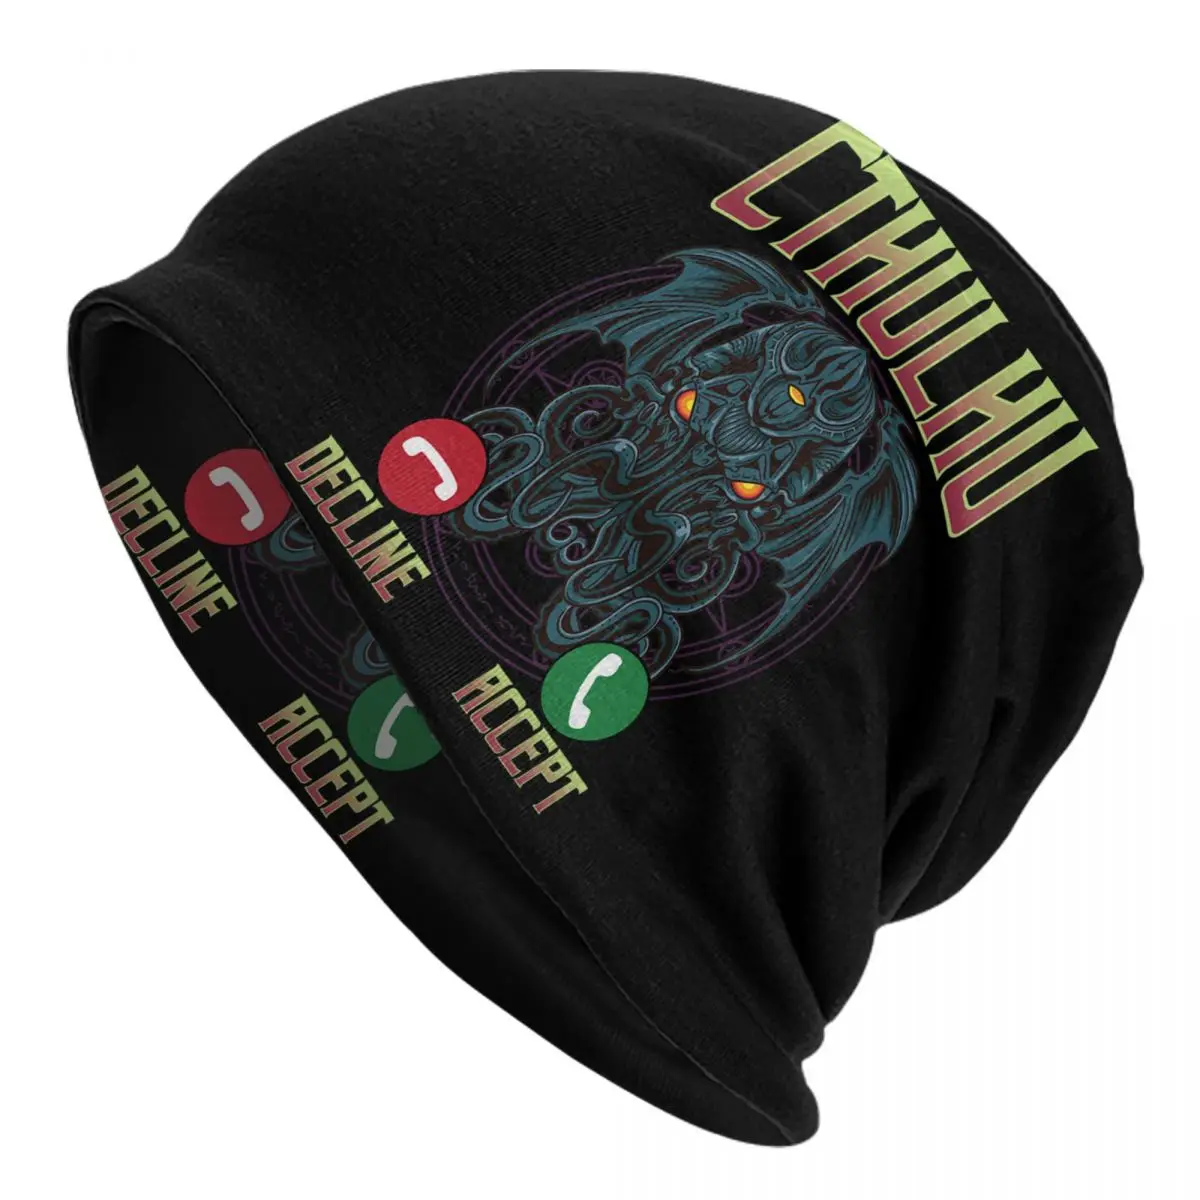 

The Call Of Cthulhu Bonnet Hat Knitted Hats Men Women Fashion Dark Occult Mythical Monster Warm Winter Skullies Beanies Caps